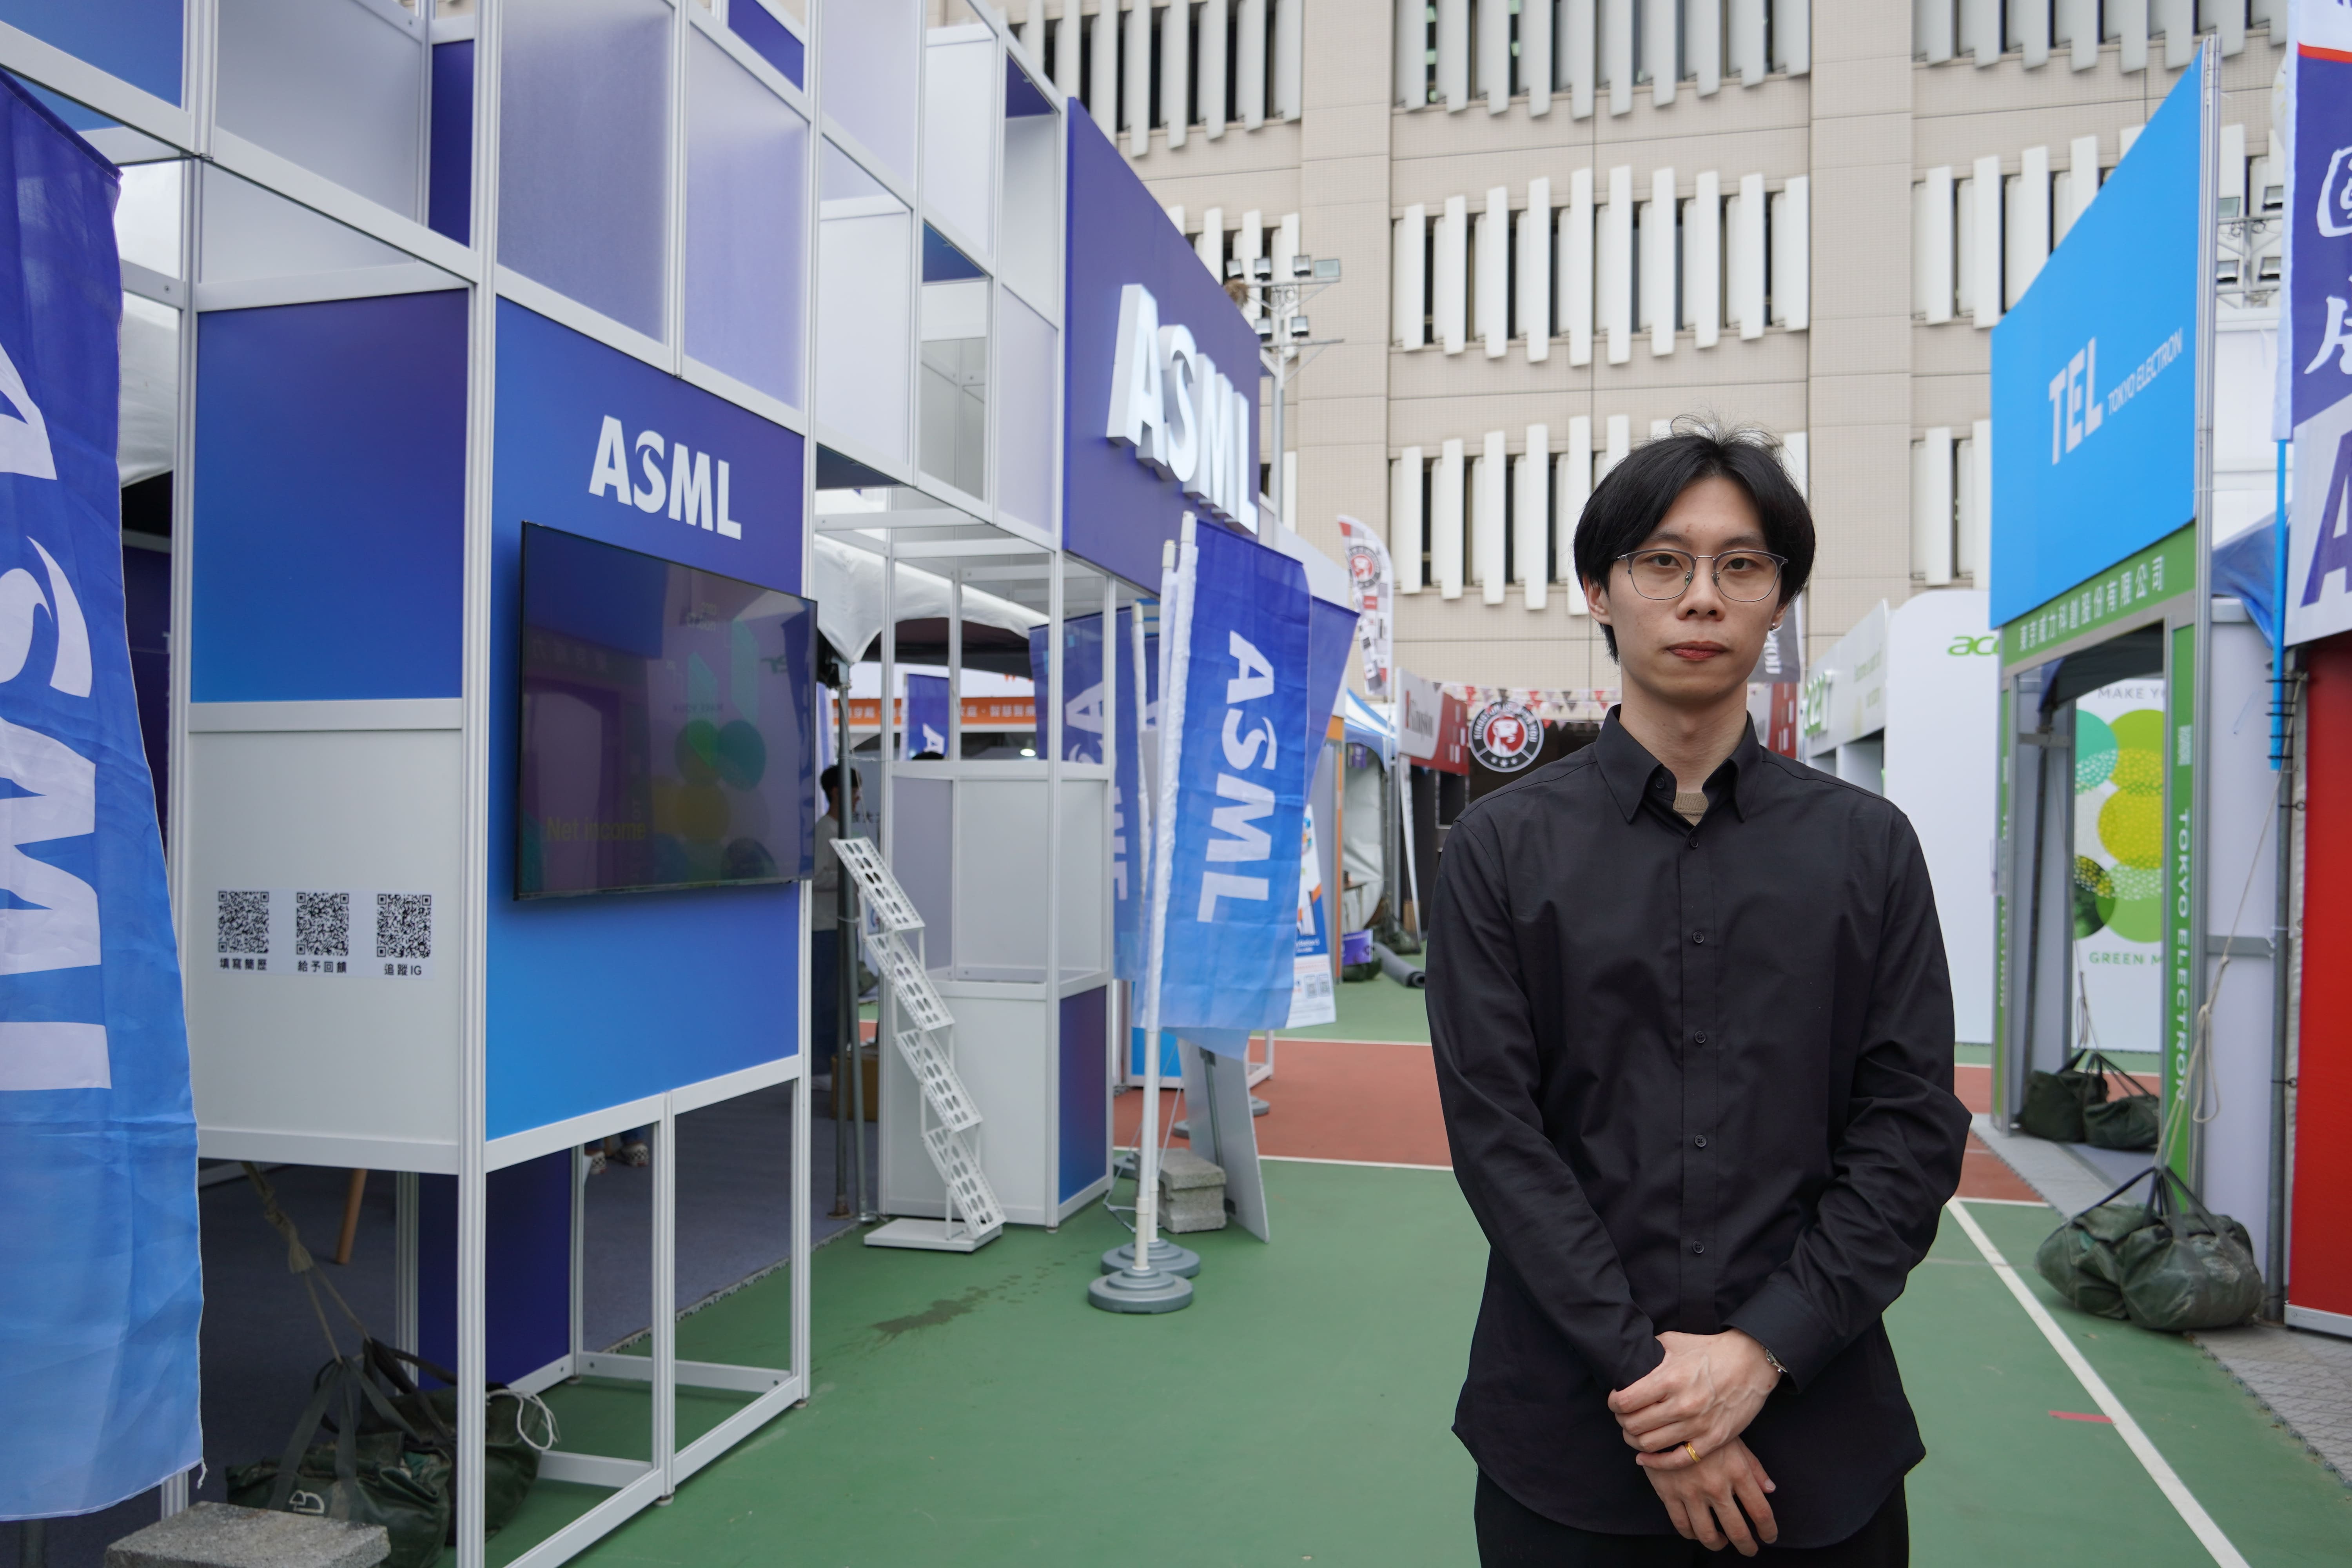 Bing-Xuan Lu, a first-year graduate student in the Department of Mechanical Engineering at Taiwan Tech, hopes to begin his future career as an engineer in Taiwanese factories and then strive towards overseas work.